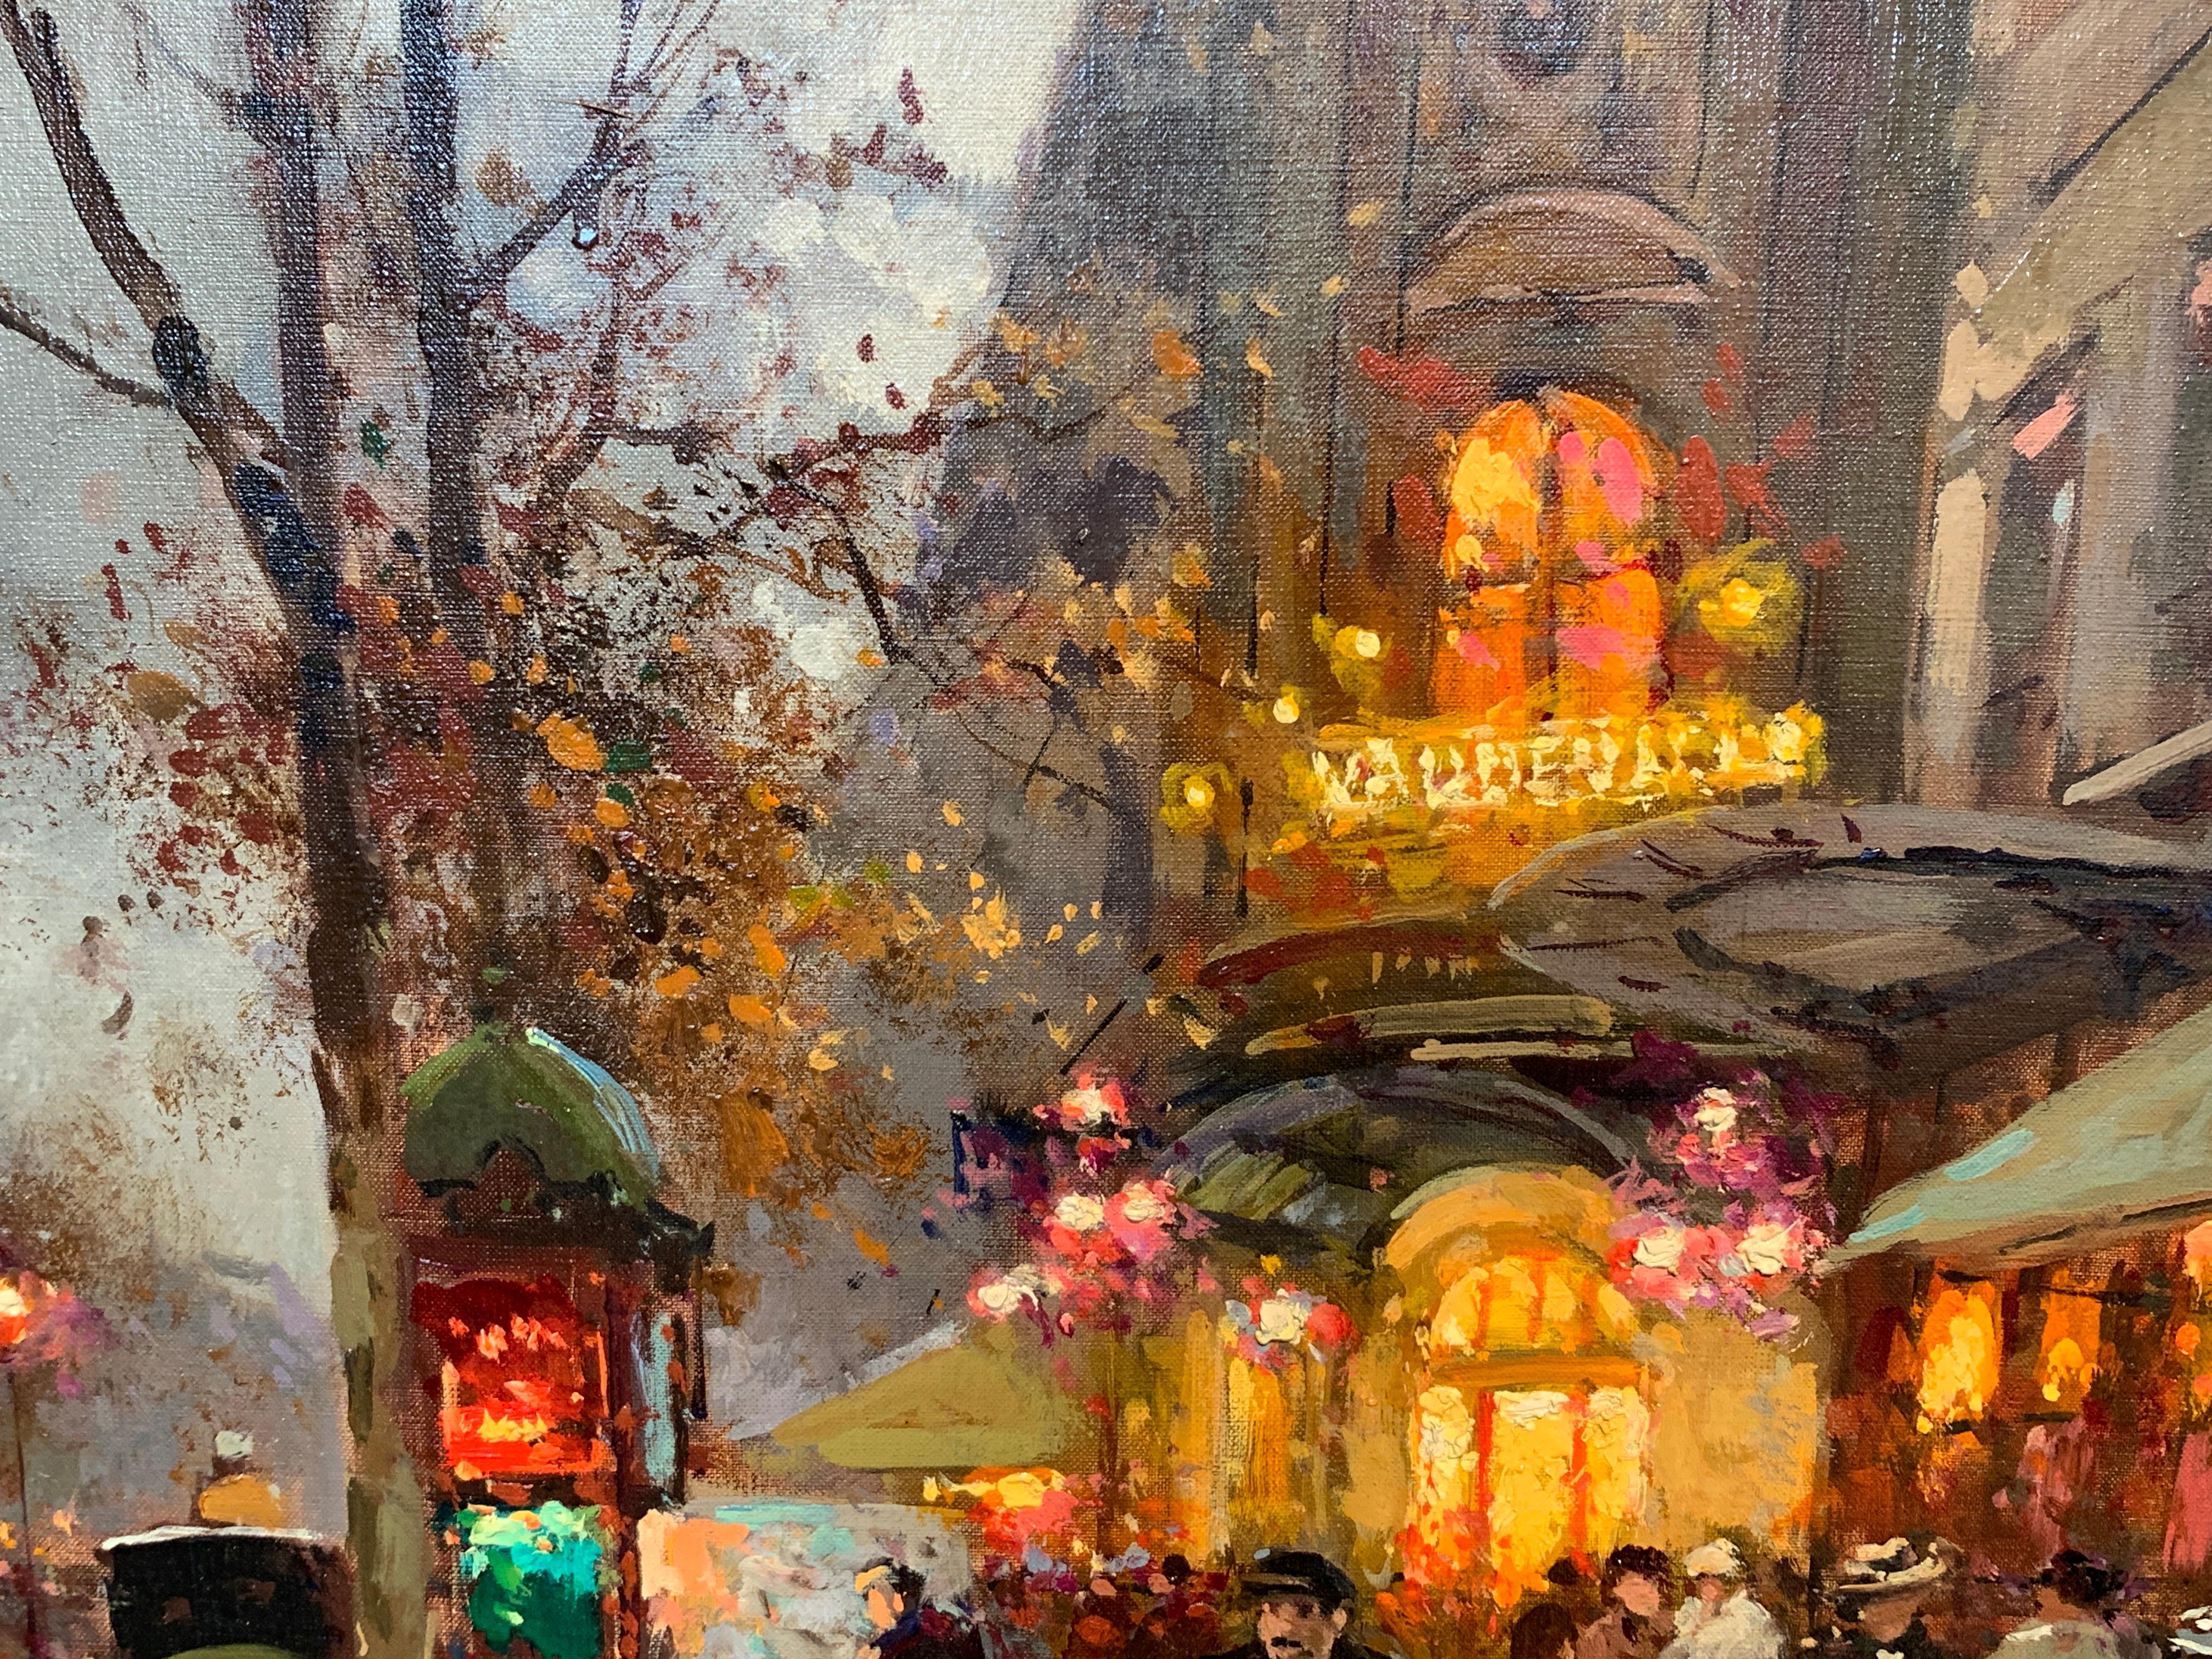 Vaudeville Theatre by Edouard Cortes was painted circa 1955-60 and signed lower left. It is oil on canvas measuring 18x22 in original unlined condition. The piece is included in the Catalogue Raisonne - The complete works of Cortes and includes the